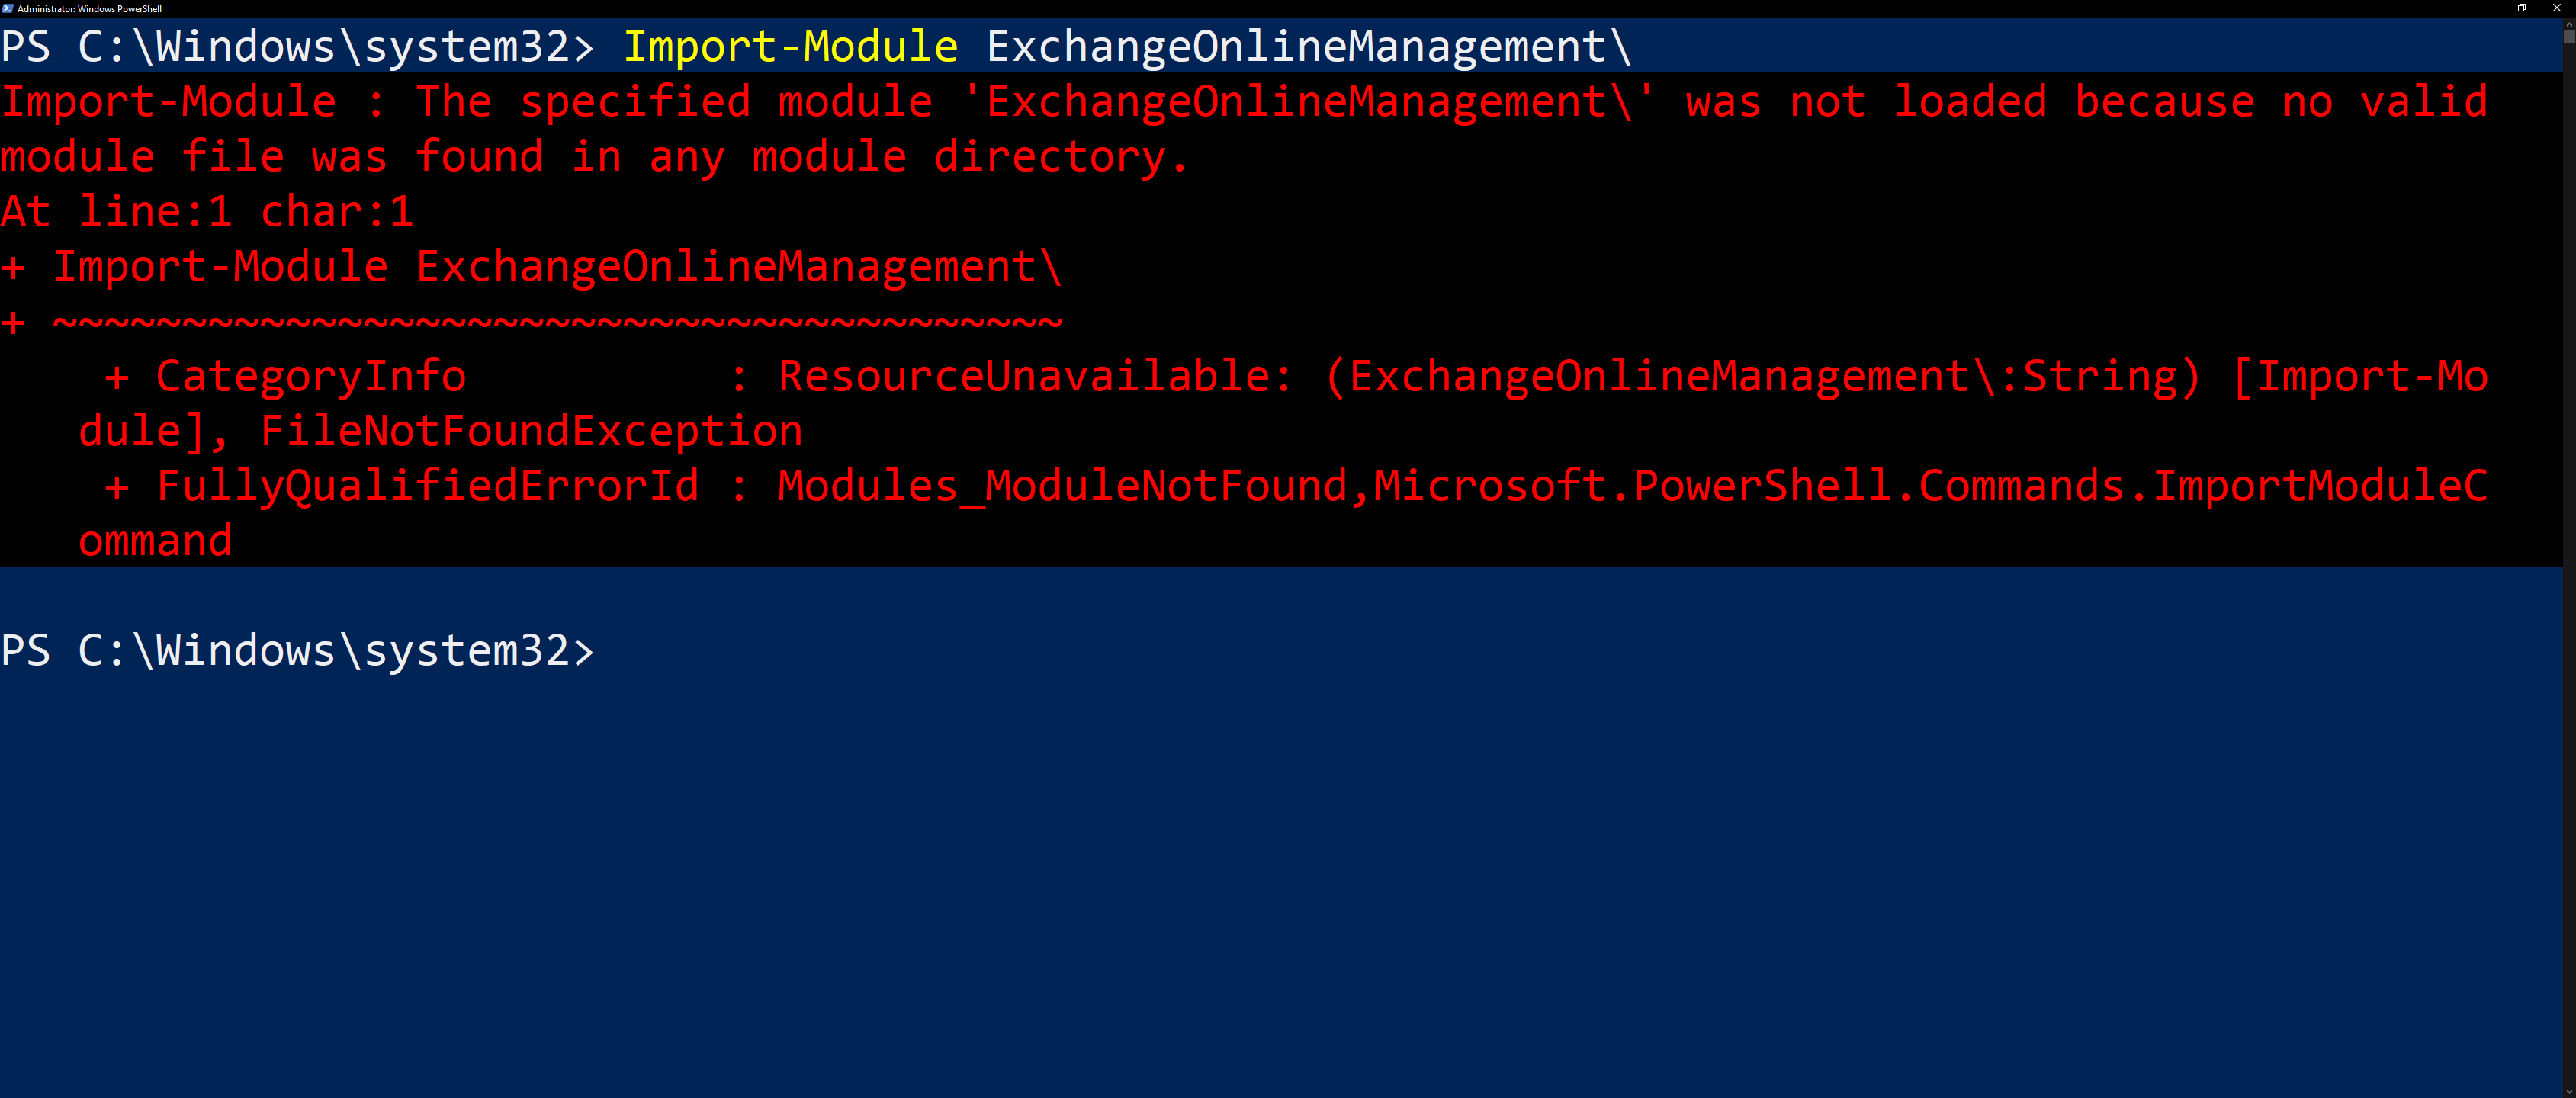 Import-Module : The specified module 'ExchangeOnlineManagement' was not loaded because no valid module file was found in any module directory.